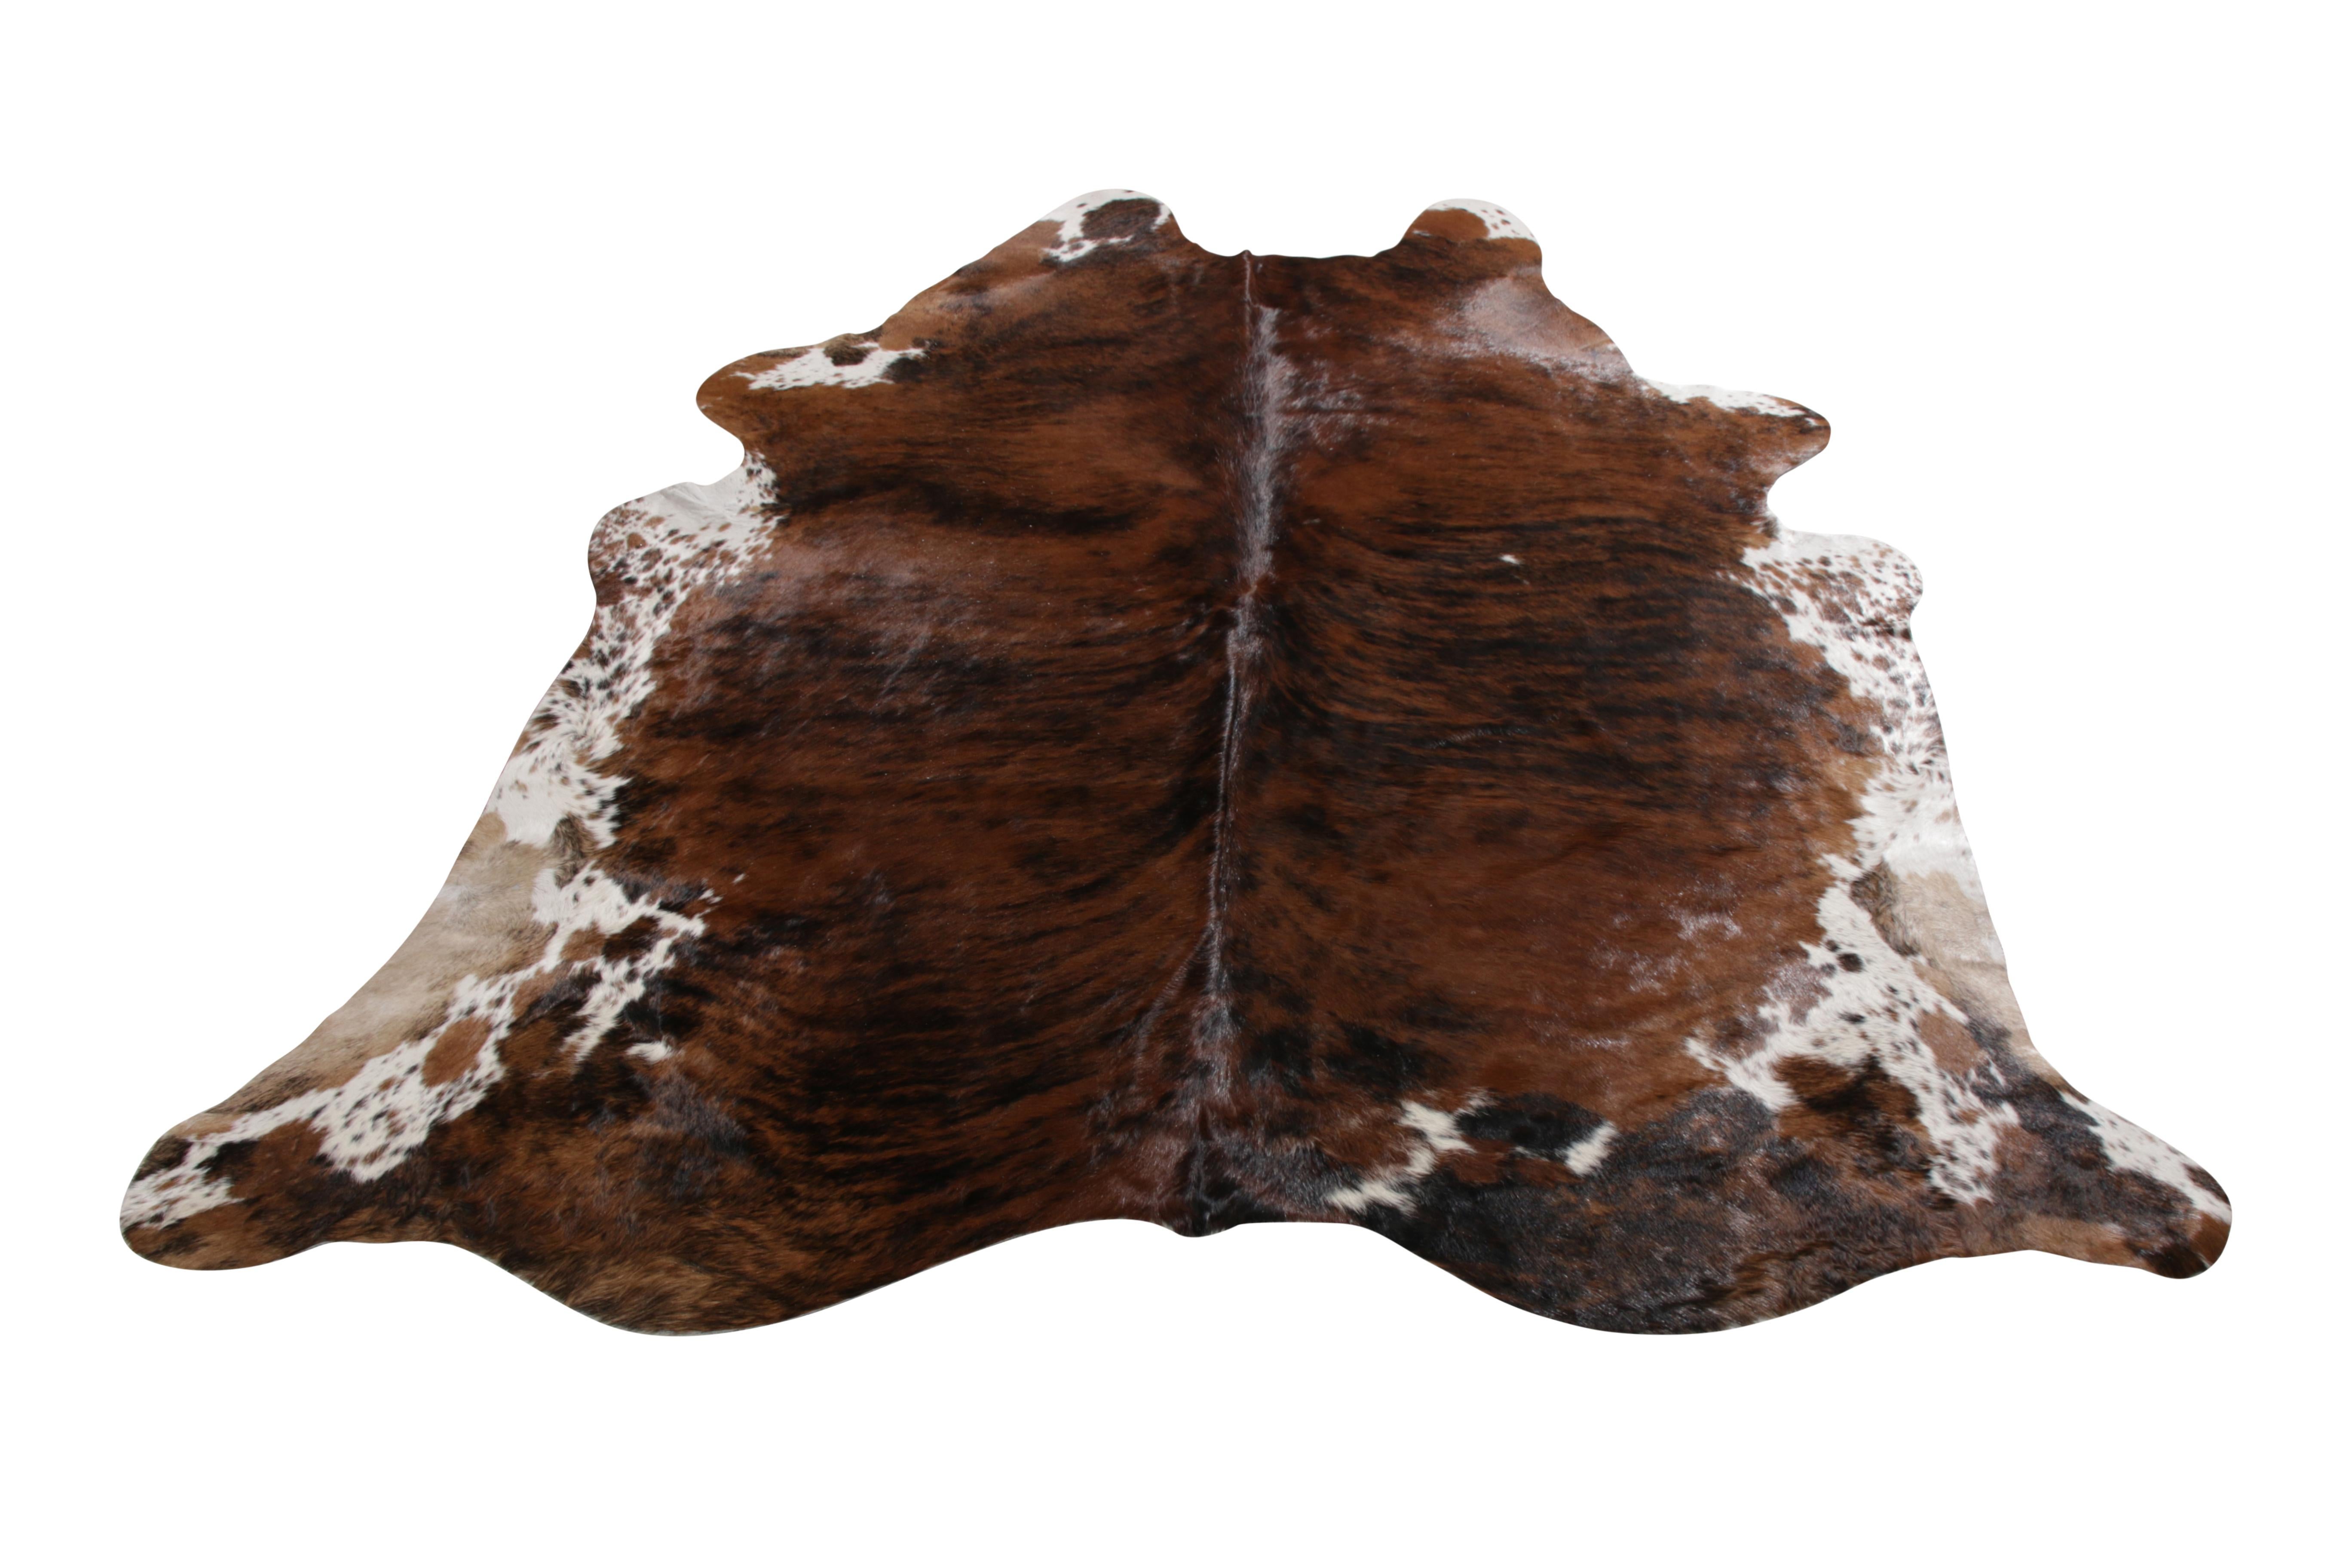 A 7 x 8 from Rug & Kilim’s line of handmade cowhide rugs. Enjoying a silky, lustrous sheen complementing the pallet of rich brown and forgiving white accents. A comfortable, textural choice, particularly well suited to country homes and rustic